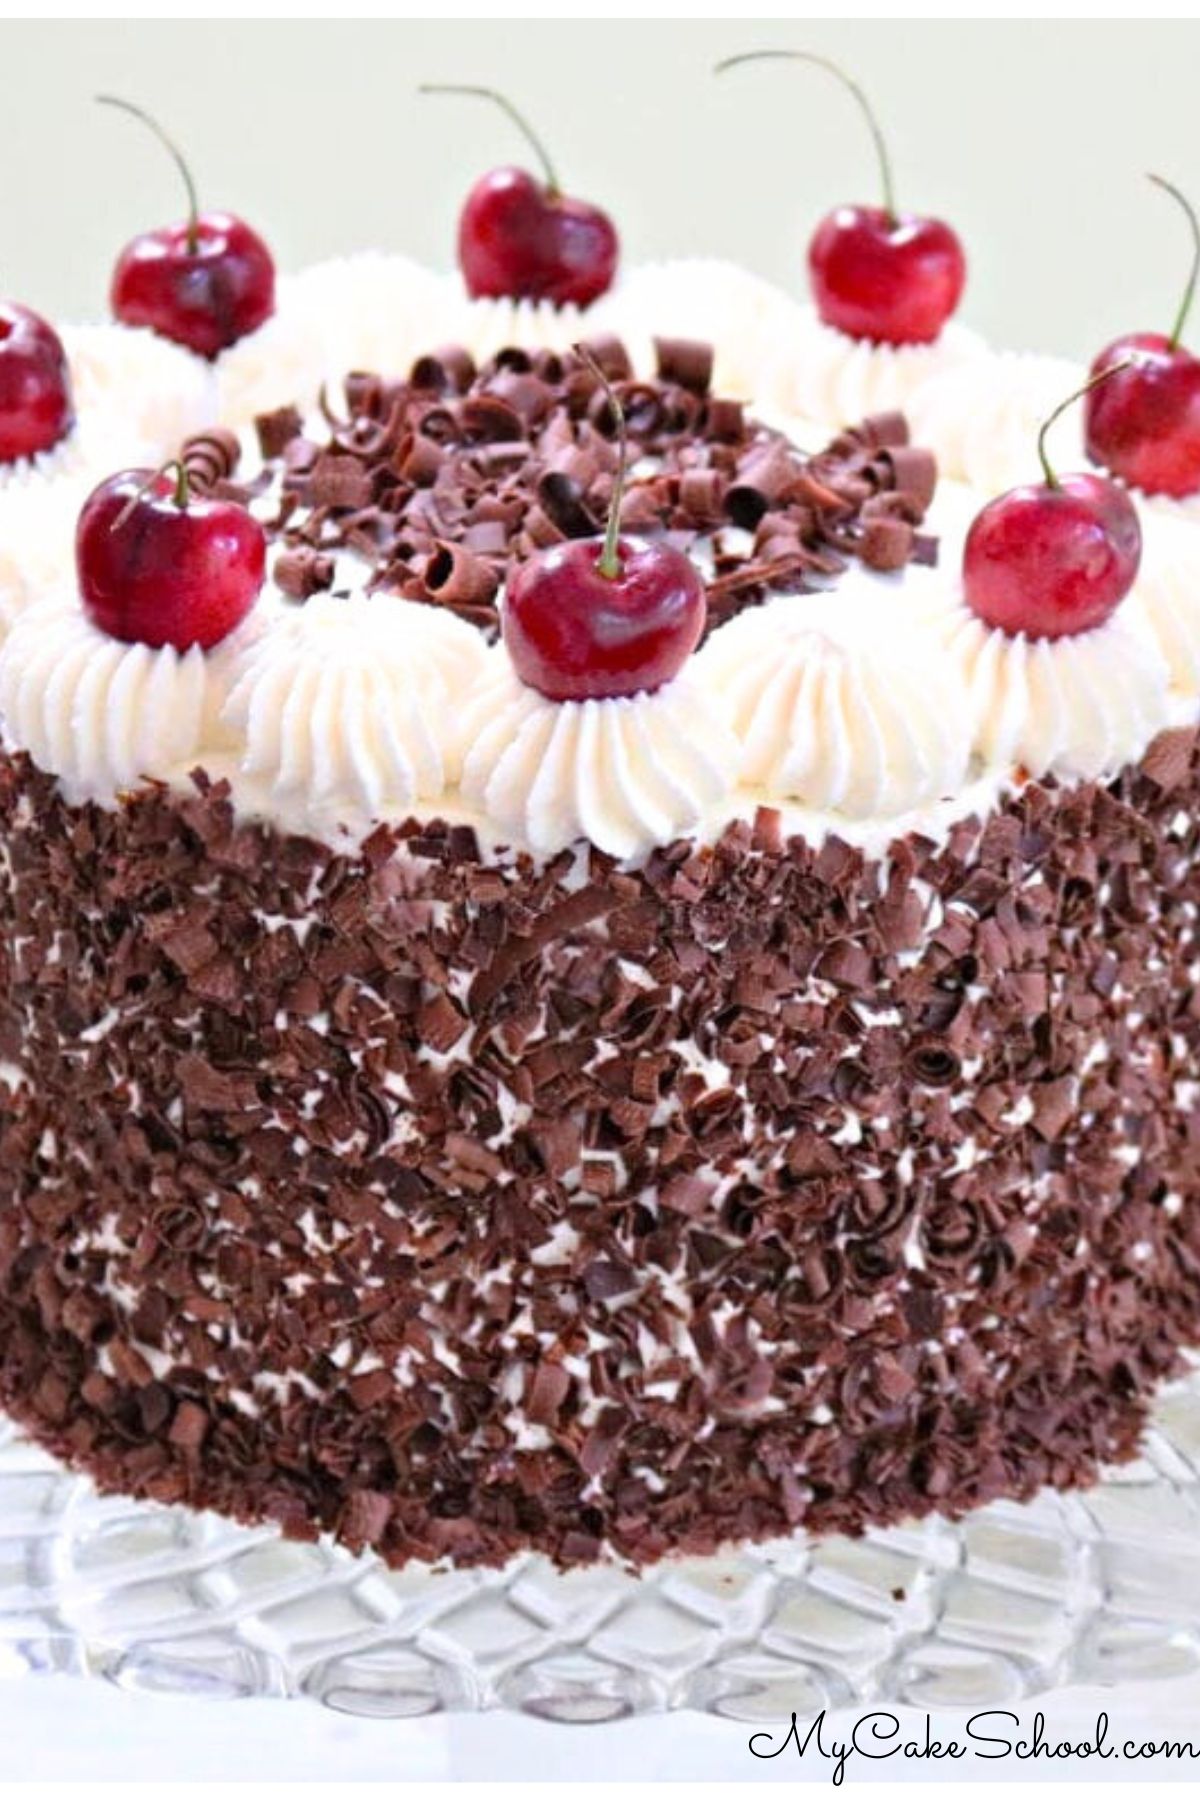 Black Forest Cake on glass pedestal, covered with chocolate shavings, cherries, and whipped cream.